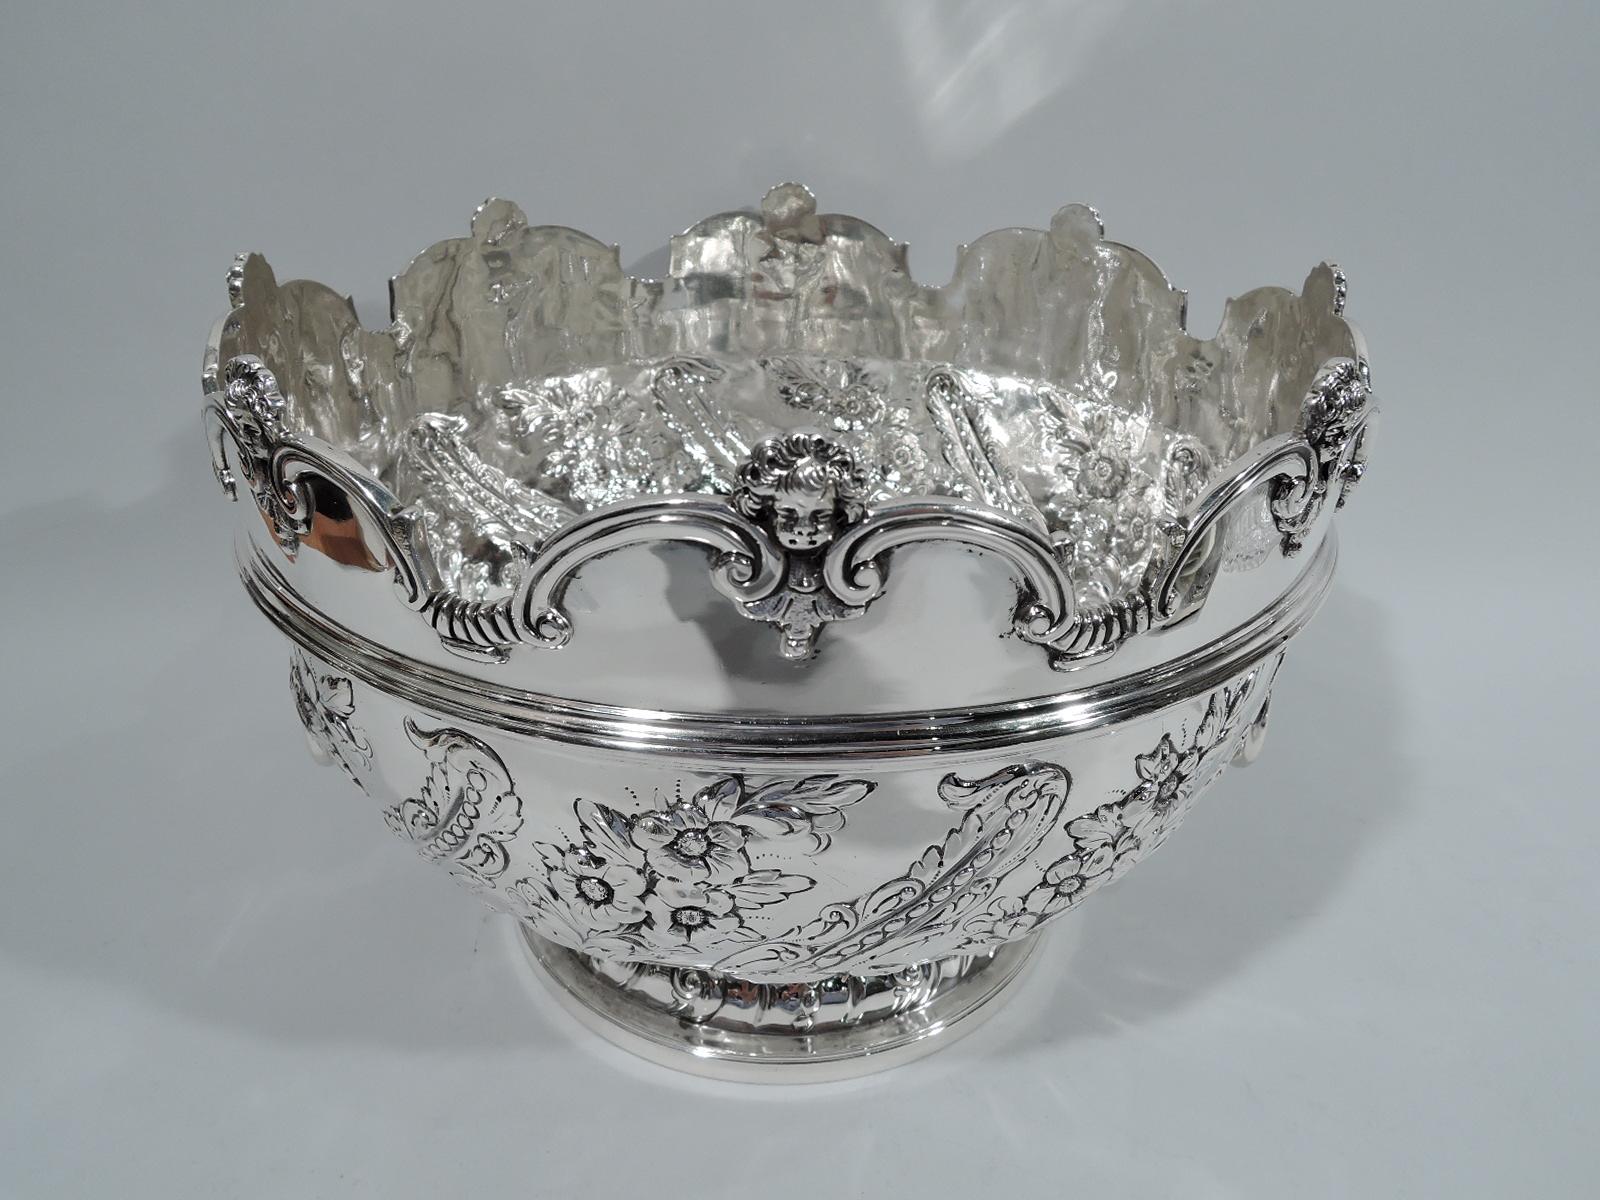 Victorian Georgian sterling silver monteith, 1895. Curved and girdled with cased leaf and flower lobing, and lion’s head side mounts with beaded and loose-mounted open bracket handles. Rim has applied and molded double C-scrolls with leaves and